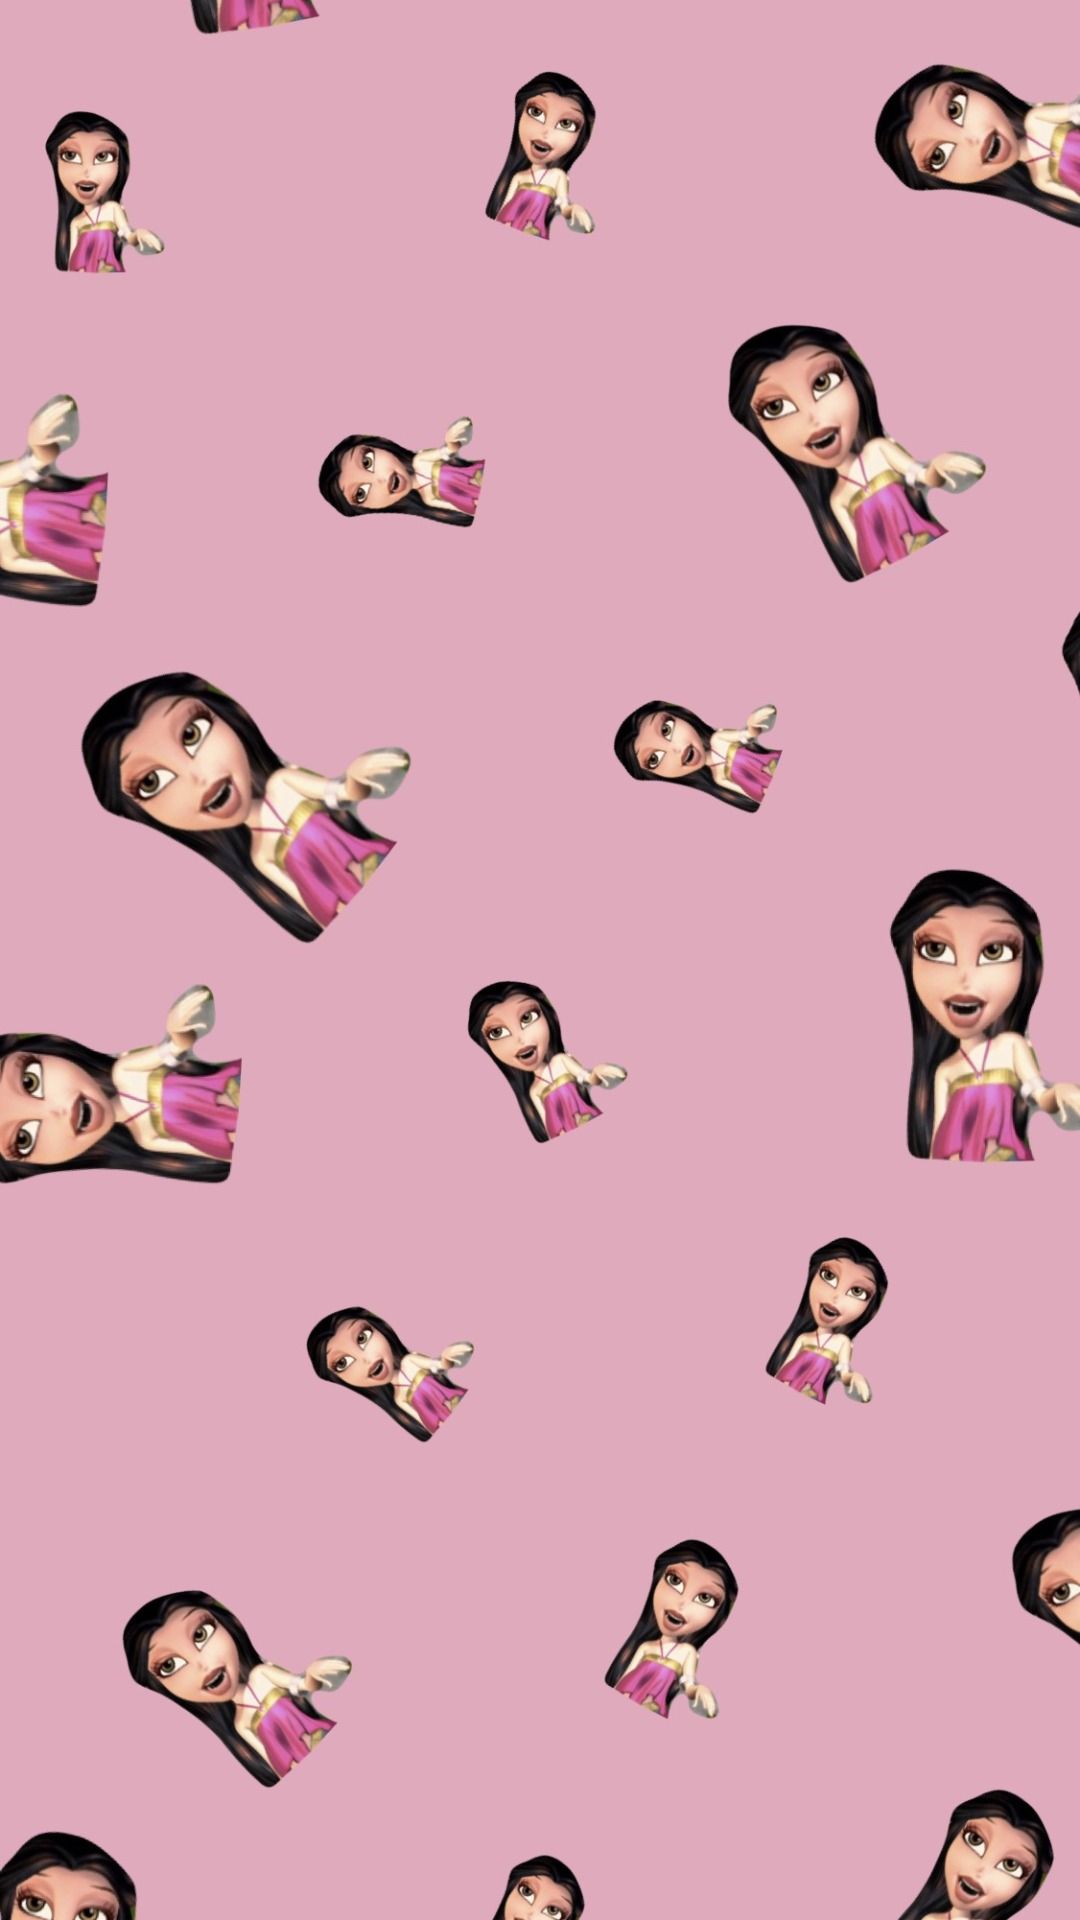 A pattern of many different faces on pink background - Bratz